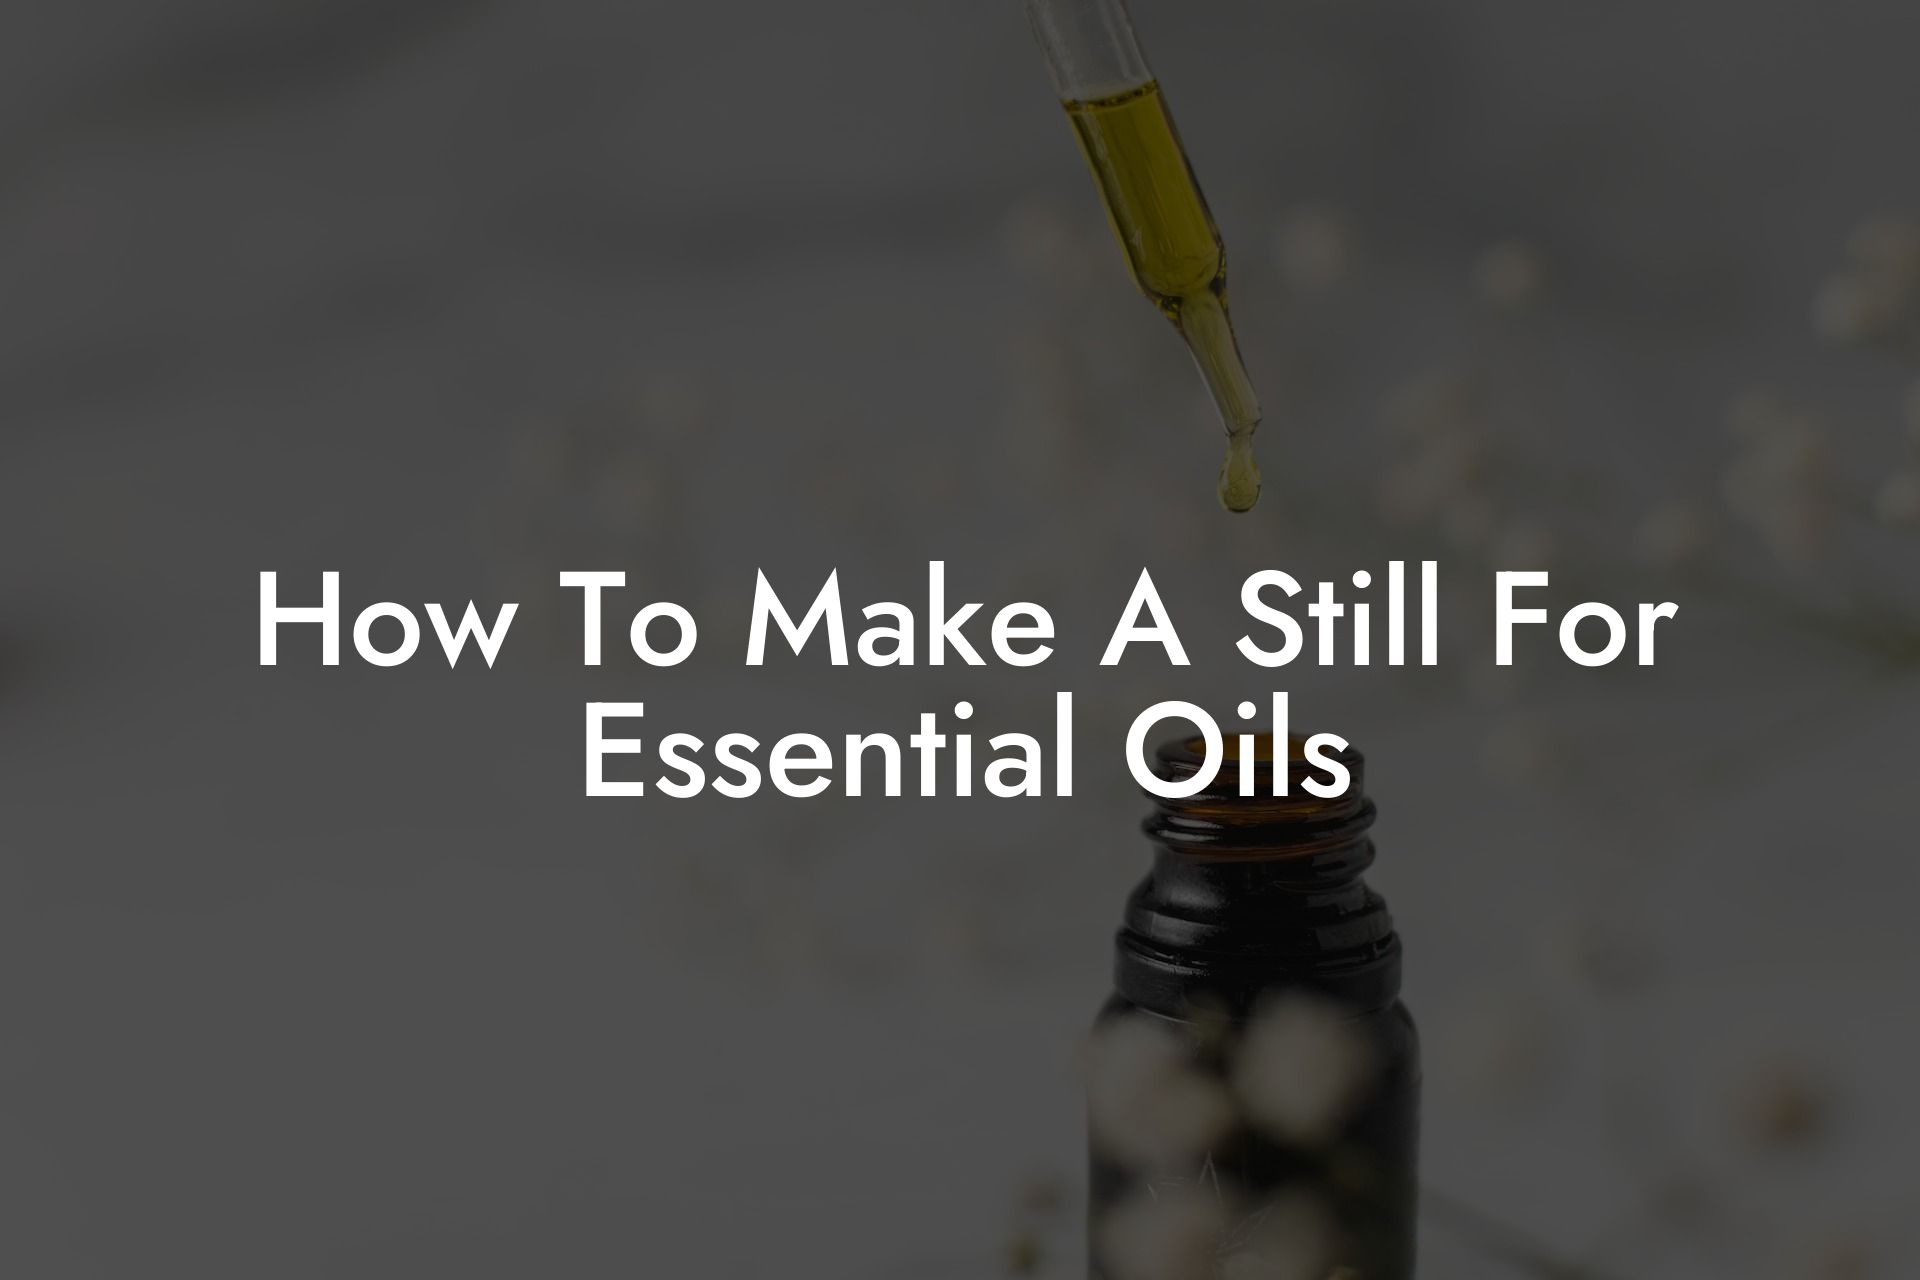 How To Make A Still For Essential Oils